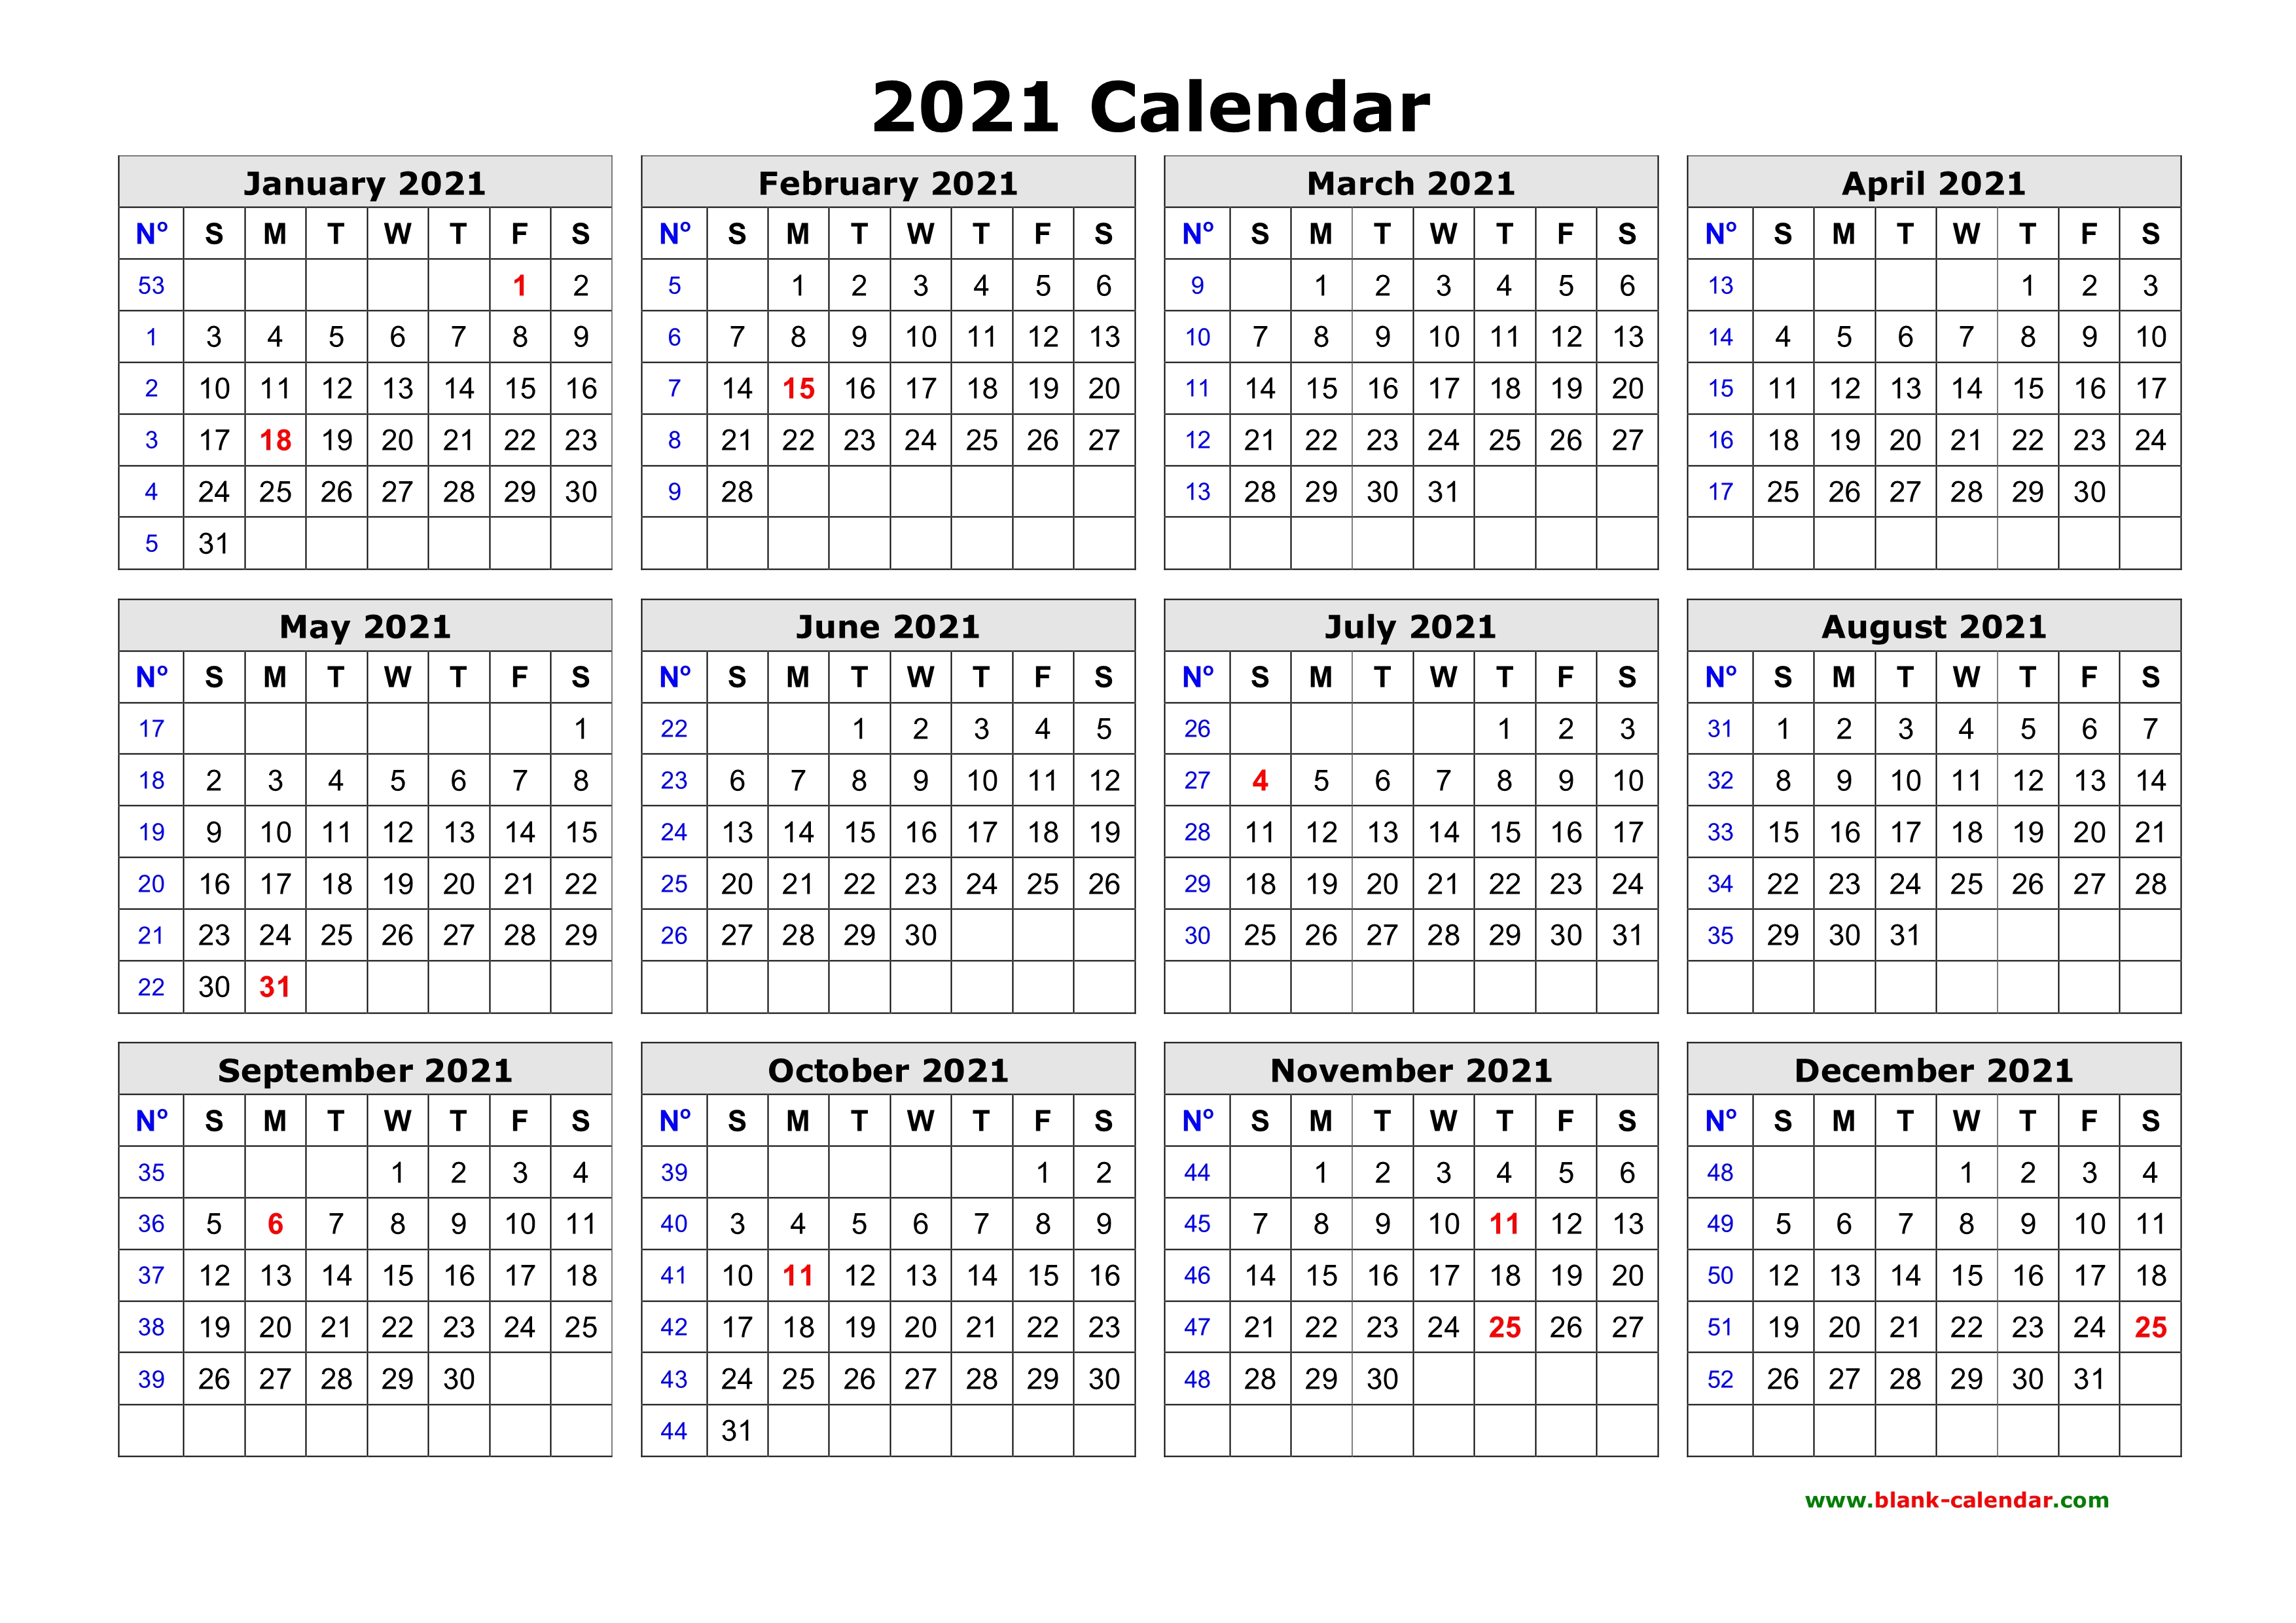 2021 Calendar Printable One Page Free Download Printable Calendar 2021 in one page, clean design.